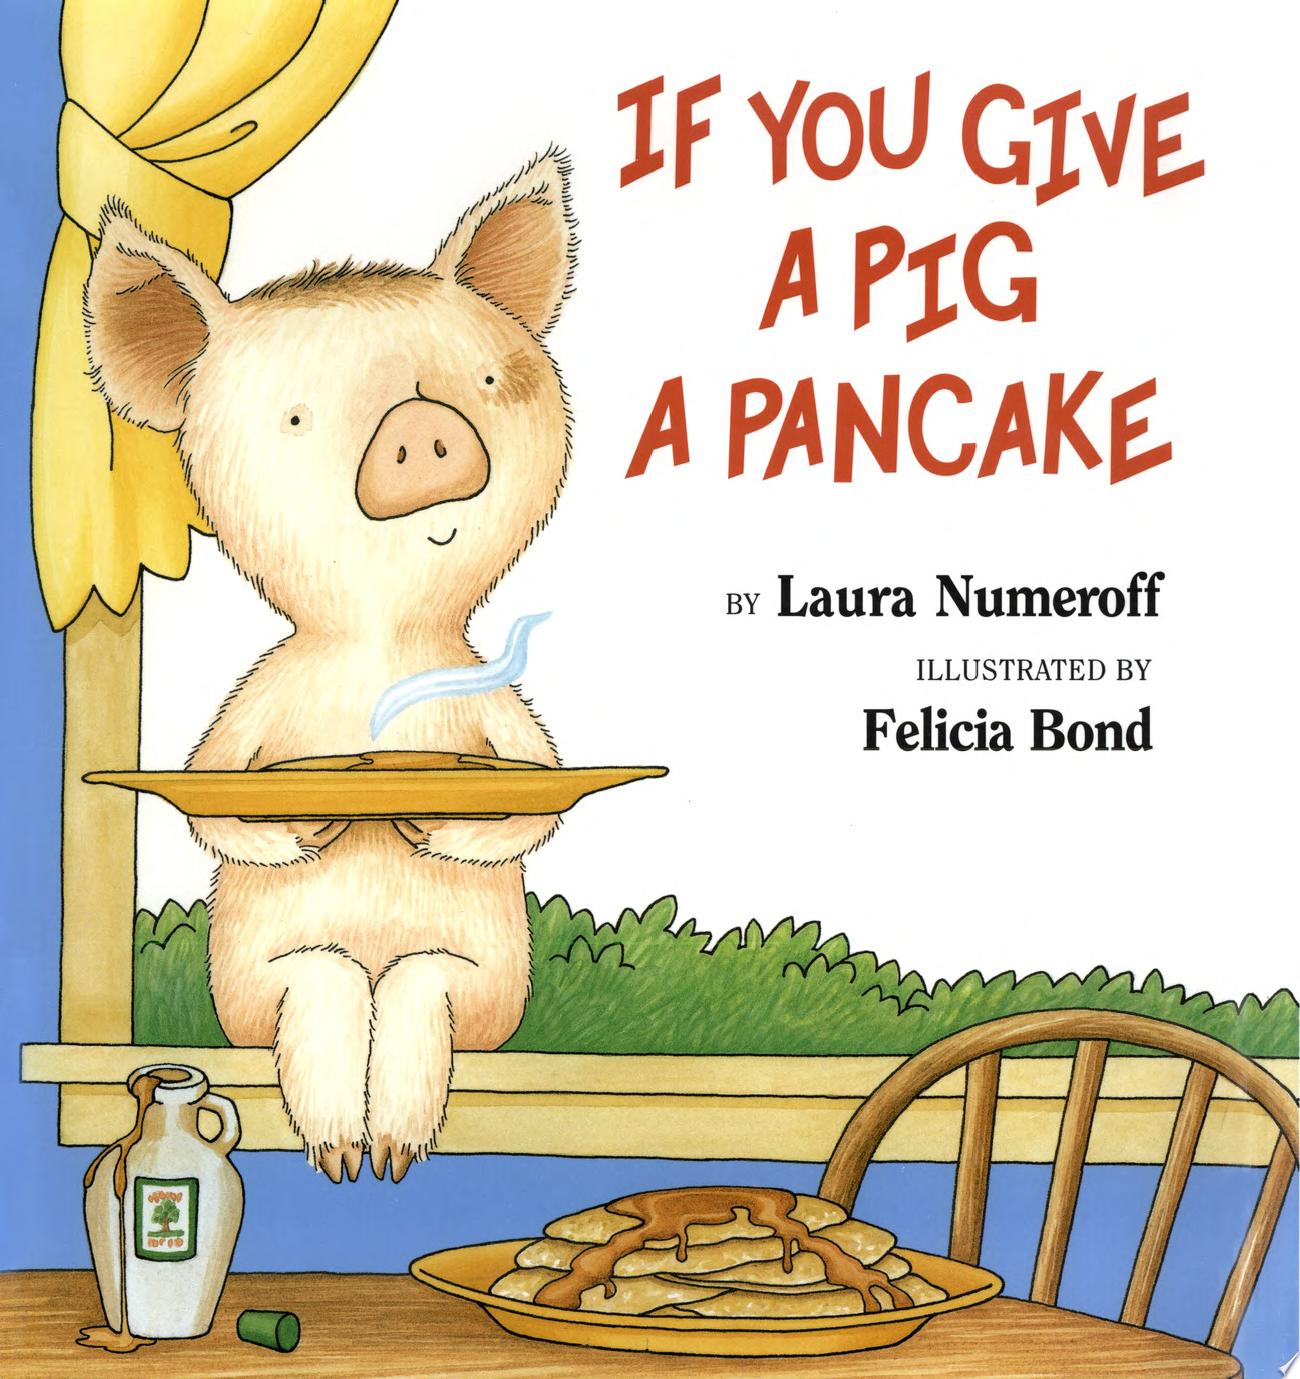 Image for "If You Give a Pig a Pancake"